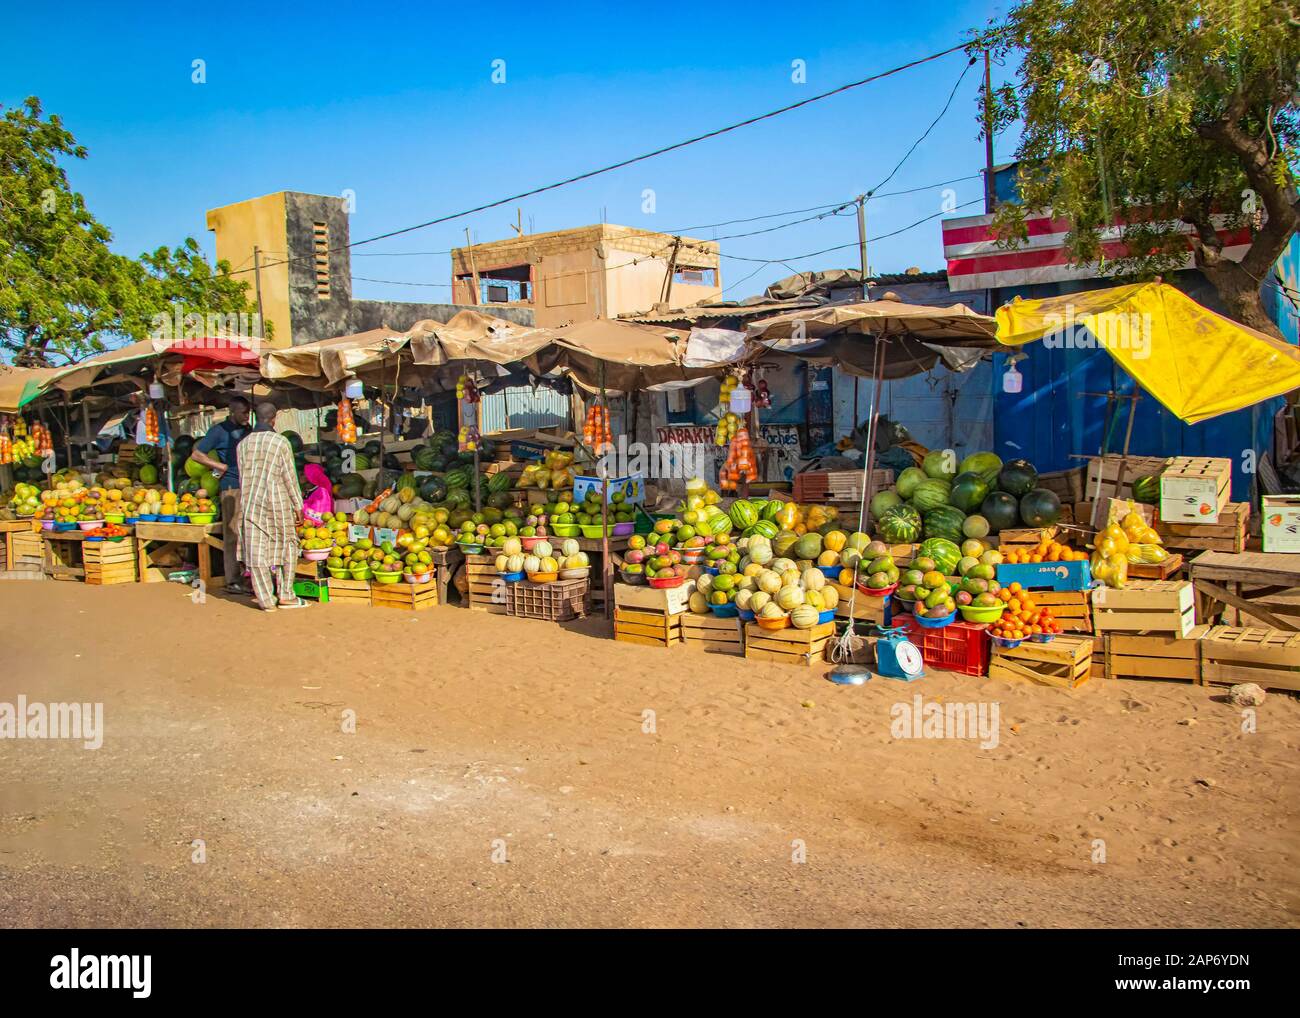 MBour, Senegal, AFRICA - April 22, 2019: Street fruit market where locals sell tropical fruits like melons, mangoes, oranges, lemons and more. Stock Photo